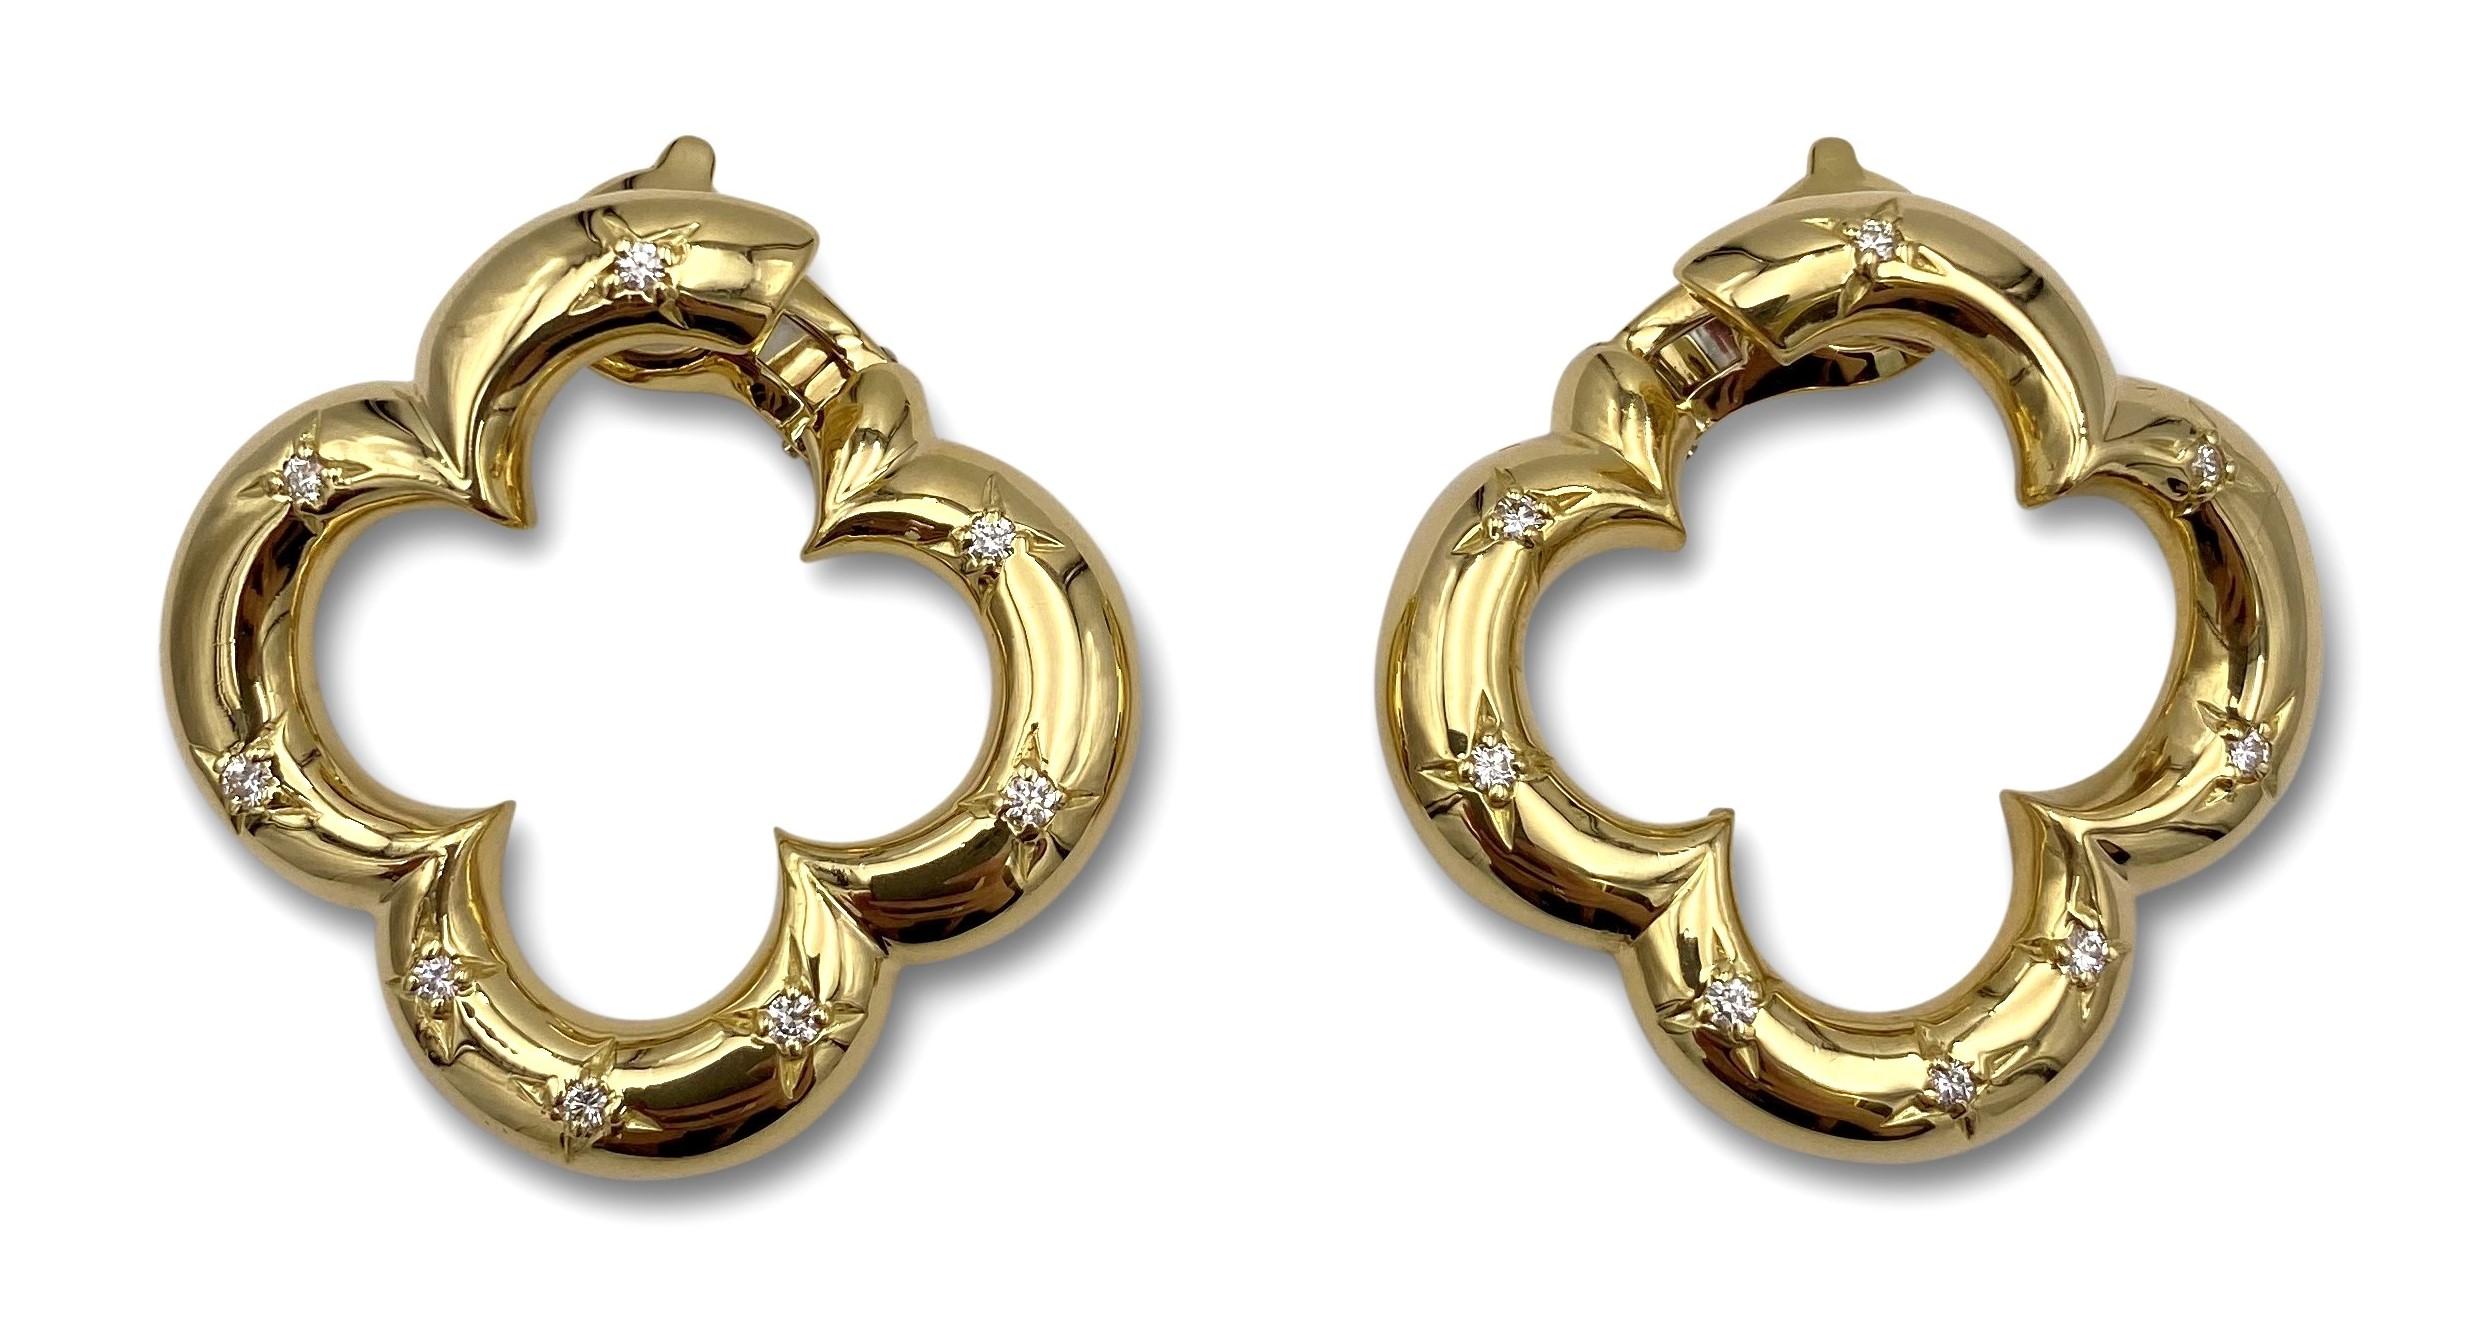 Authentic pair of Van Cleef & Arpels Alhambra earrings made in 18 karat yellow gold with 16 round cut diamonds.  CIRCA 1998.  Signed VCA, 1998, 750, with hallmarks and serial numbers.  1.45 in x 1.53 in.  Lever back clip on earrings